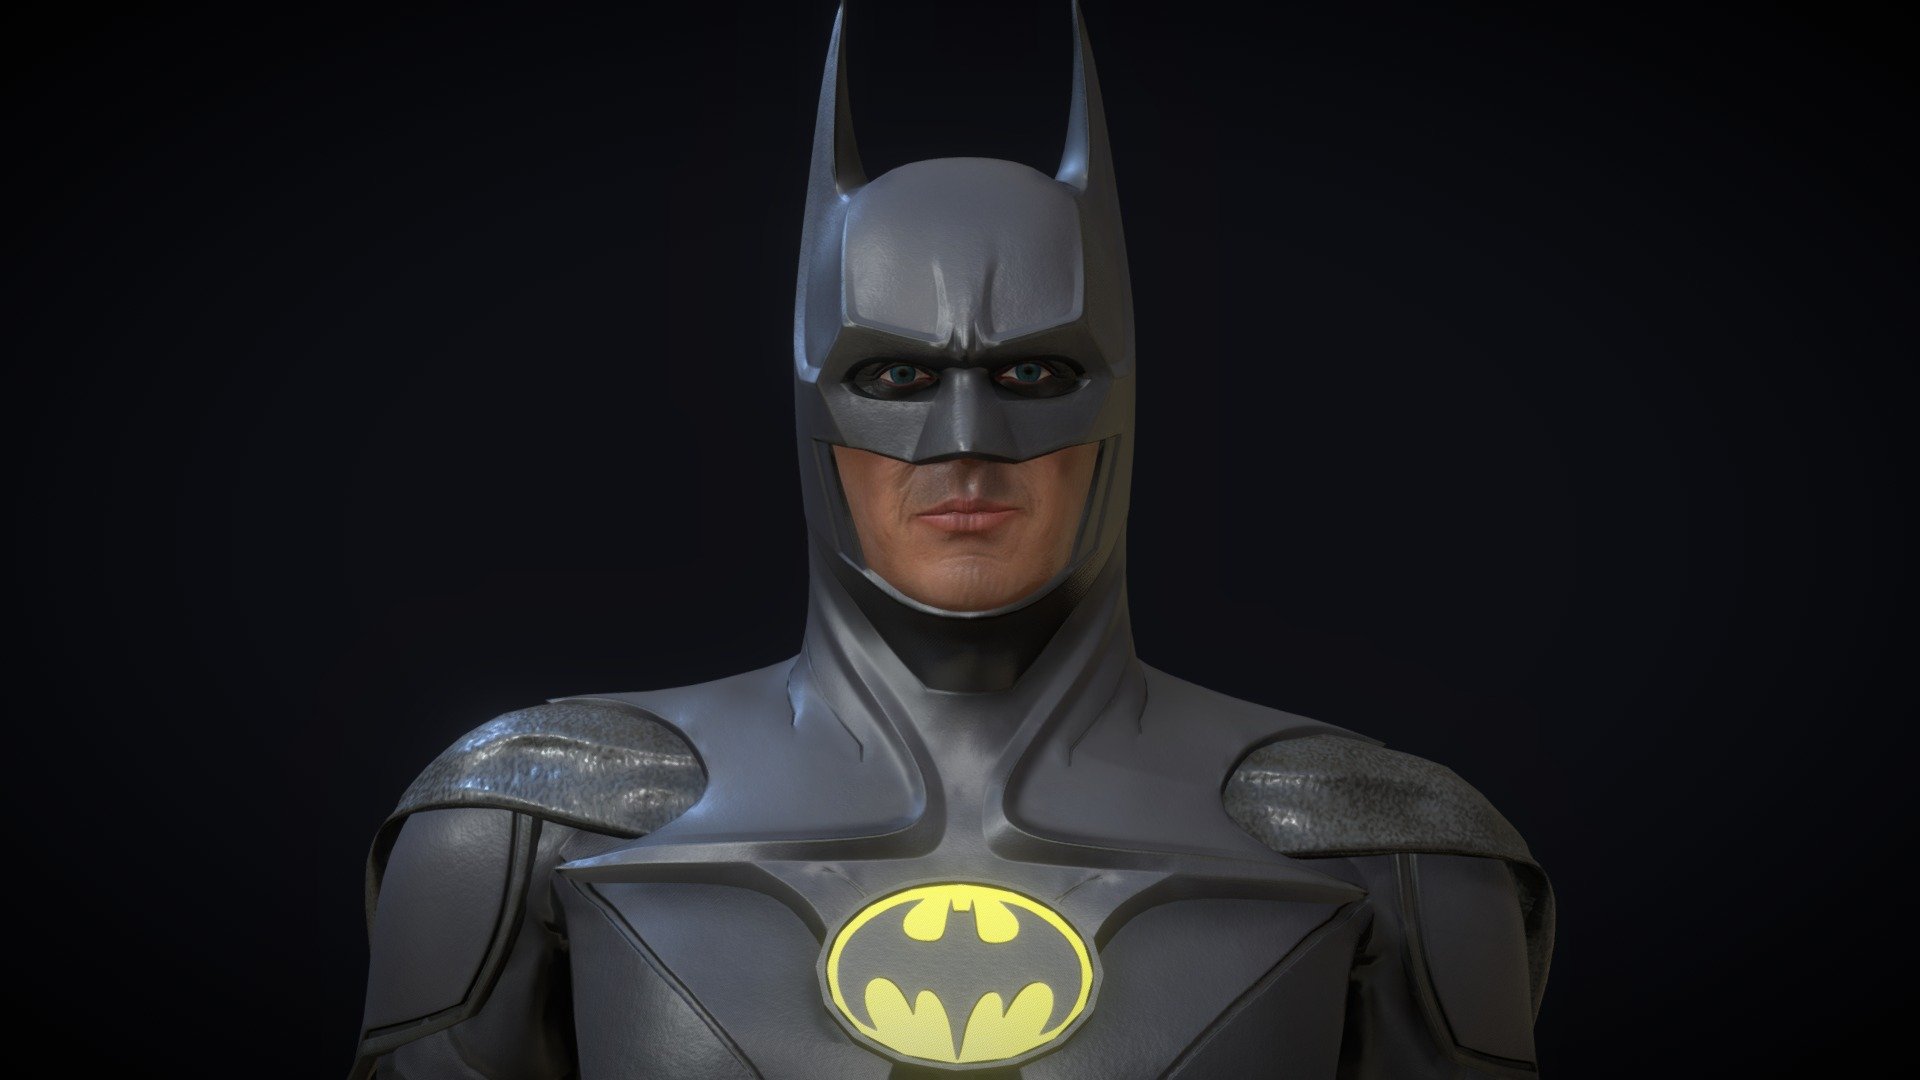 “You wanna get nuts? Let’s get nuts.” - Batman
Game ready model based on The Flash movie Michael Keaton's Batman.
High Poly mesh was done inside Zbrush, retopology and Uvs in Maya, baking and texturing with Substance Painter and finally render was done inside Marmoset Toolbag.
Full character has 83k tris, using 2 packs of 4k texture 3d model